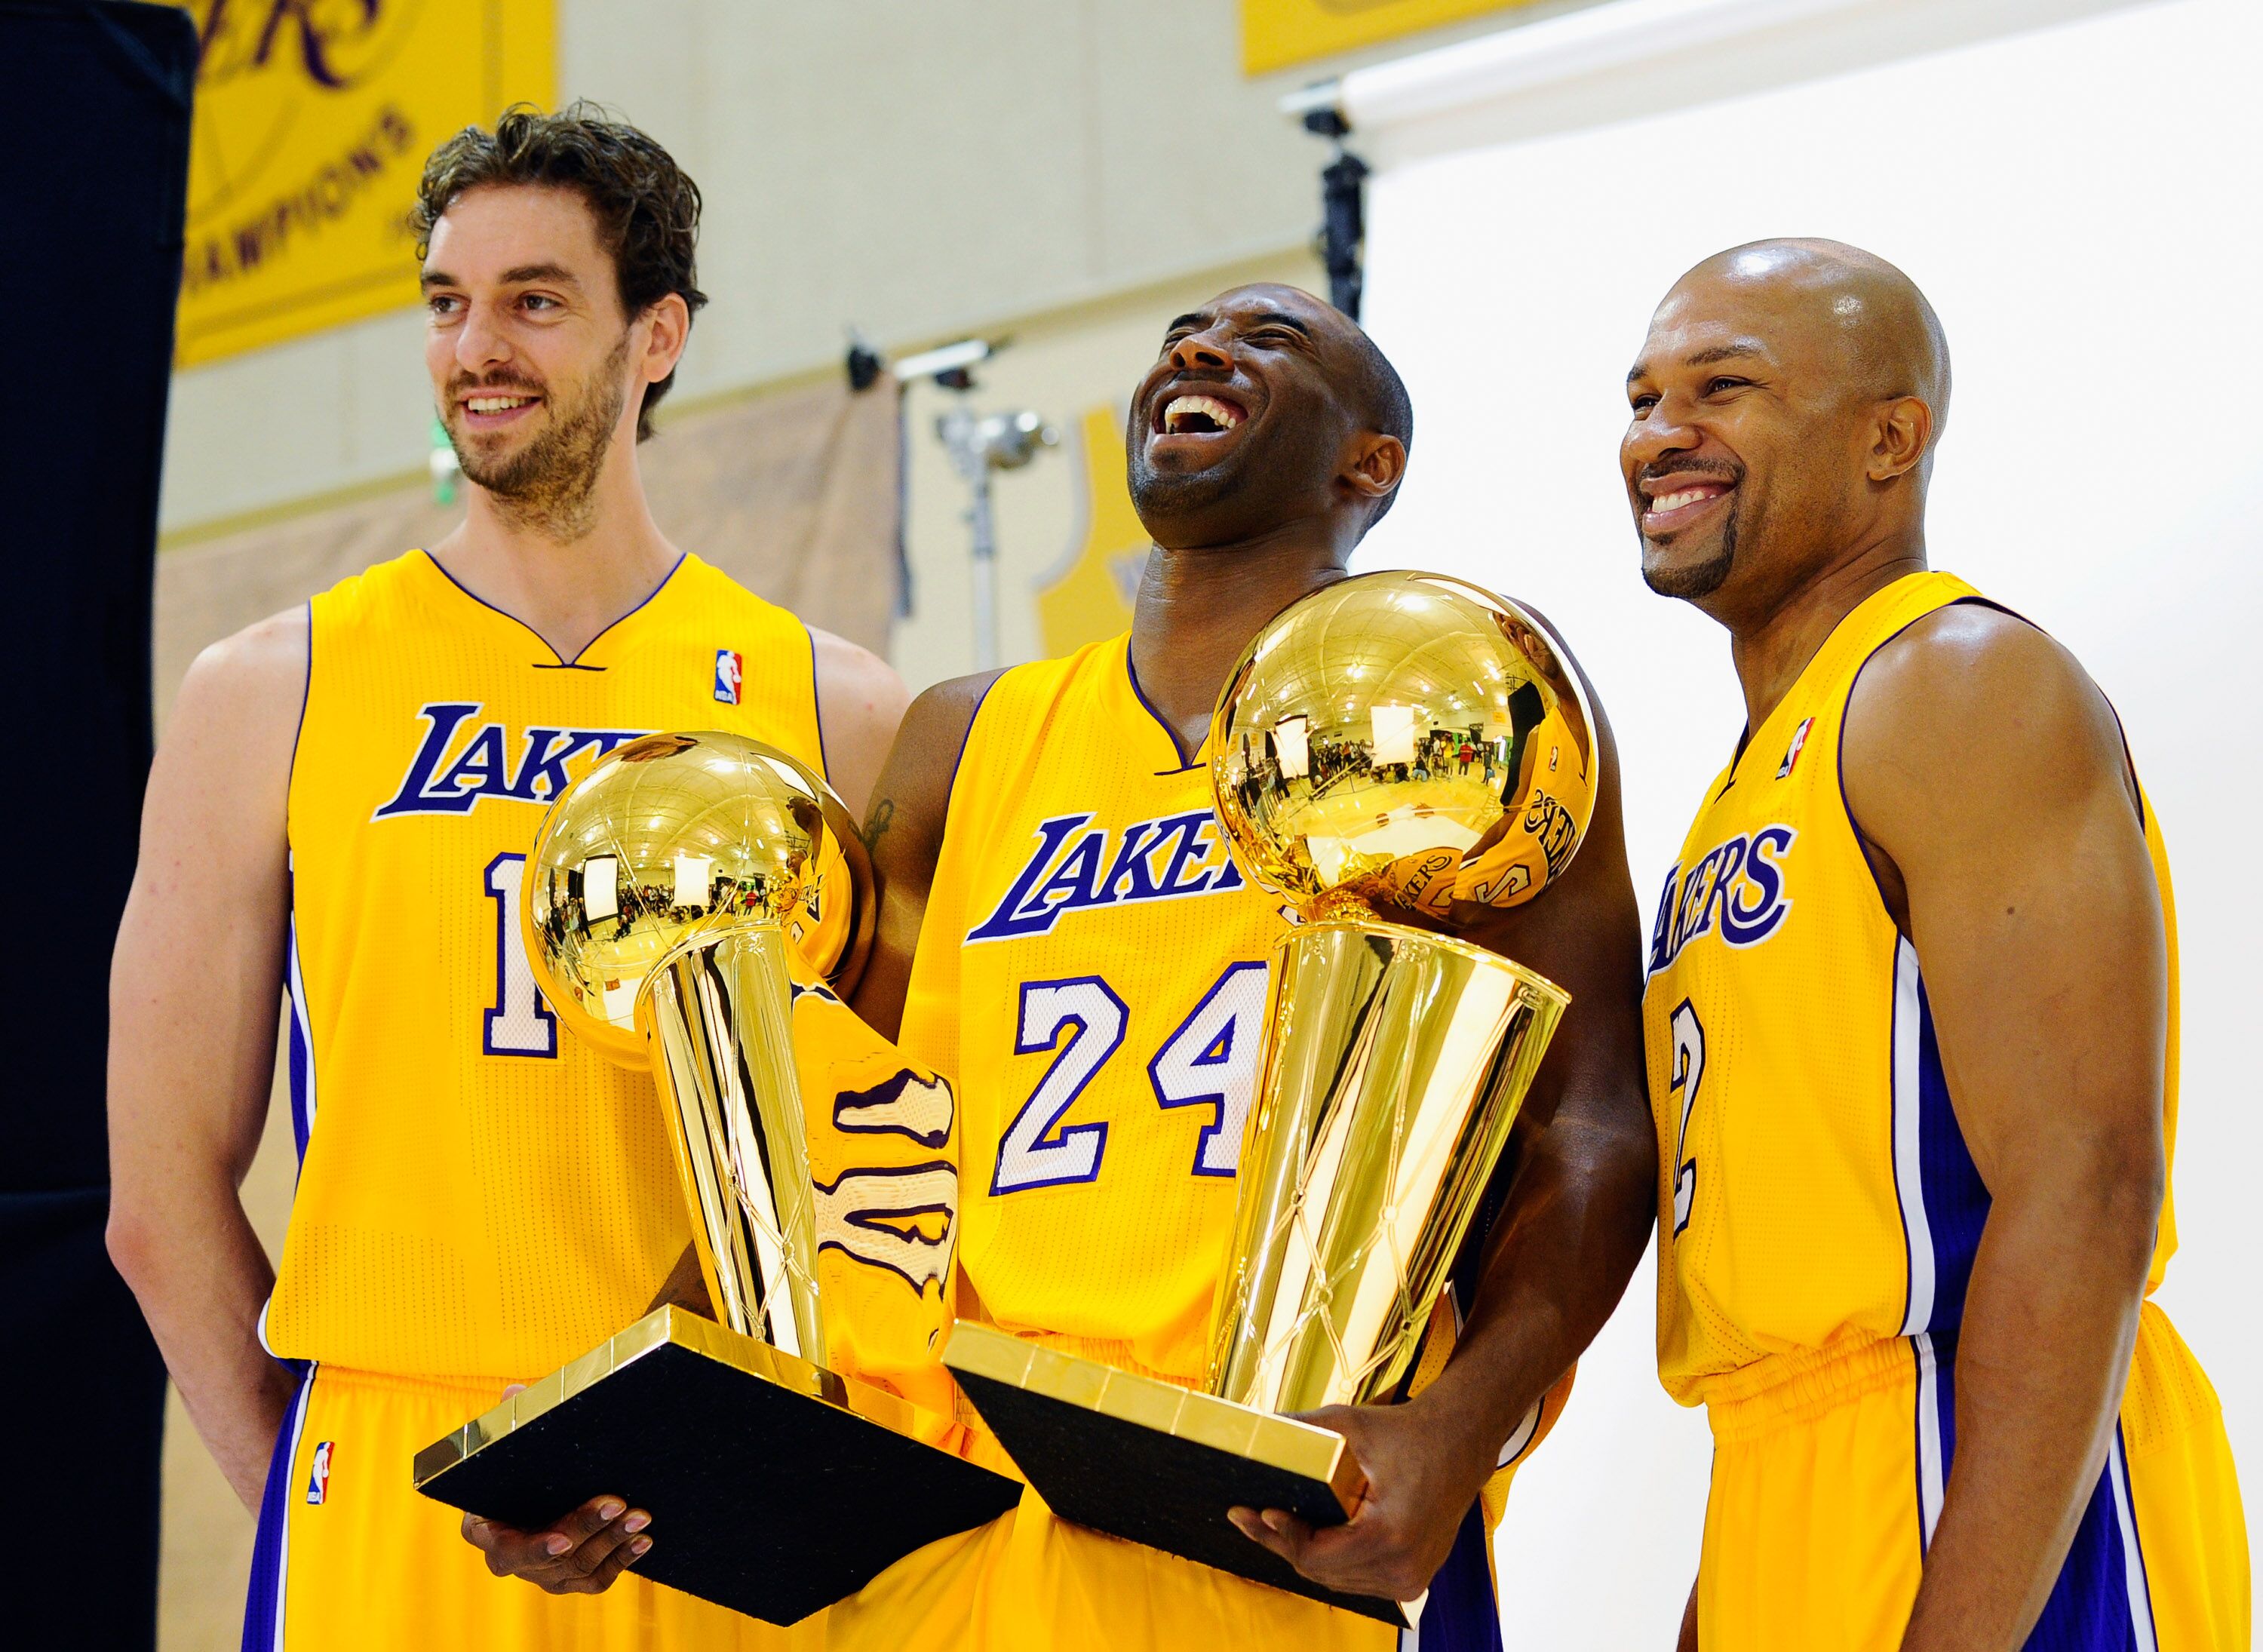 Kobe Bryant #24 of the Los Angeles Lakers laughs as he holds two NBA Finals Larry O'Brien Championship Trophy's as he poses for a photograph. | Source: Getty Images